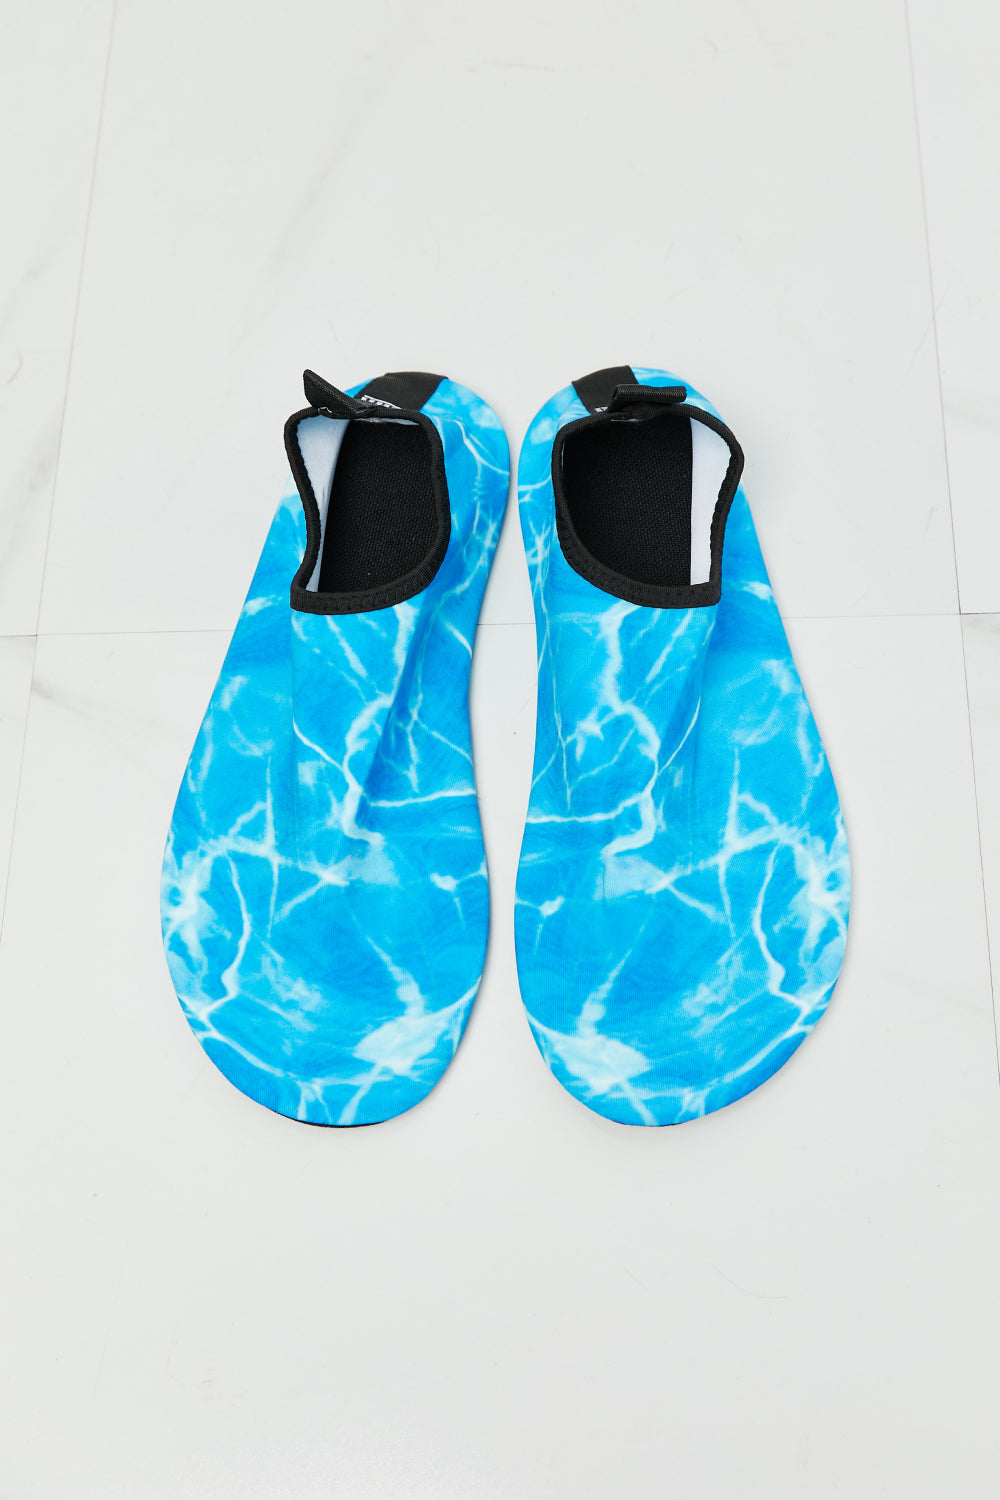 MMshoes On The Shore Water Shoes in Sky Blue - AllIn Computer